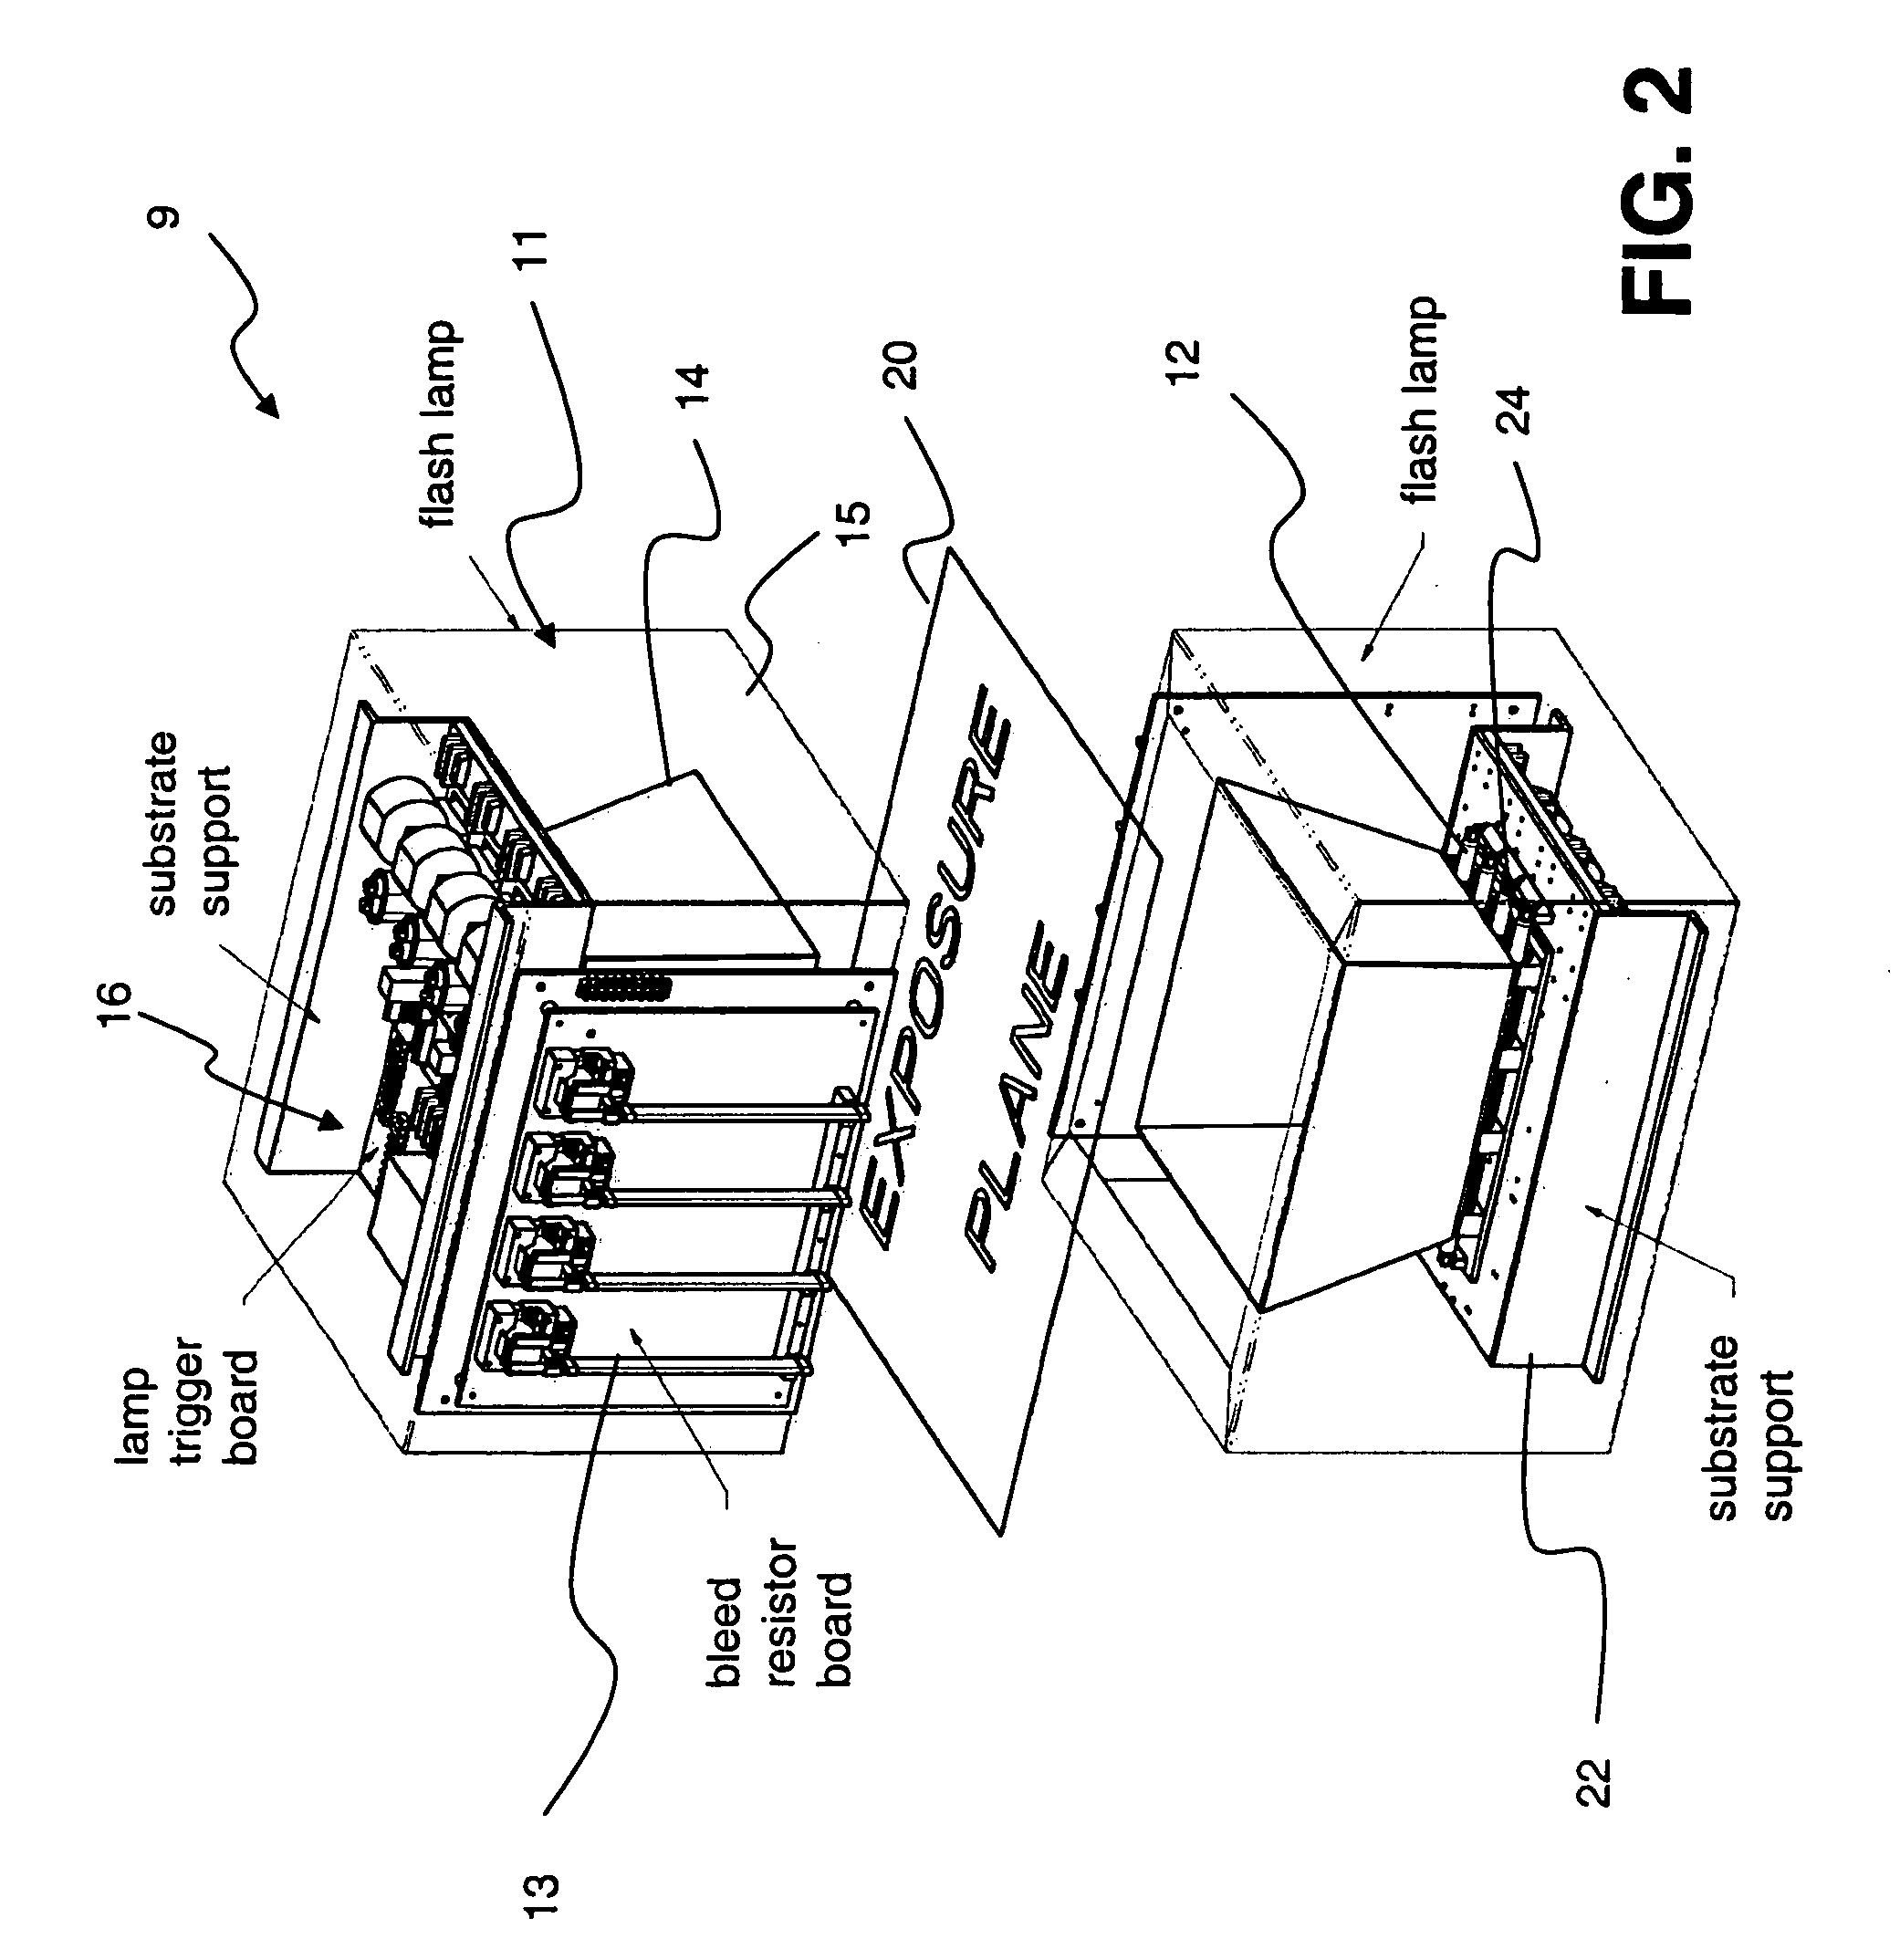 System and method for exposing electronic substrates to UV light